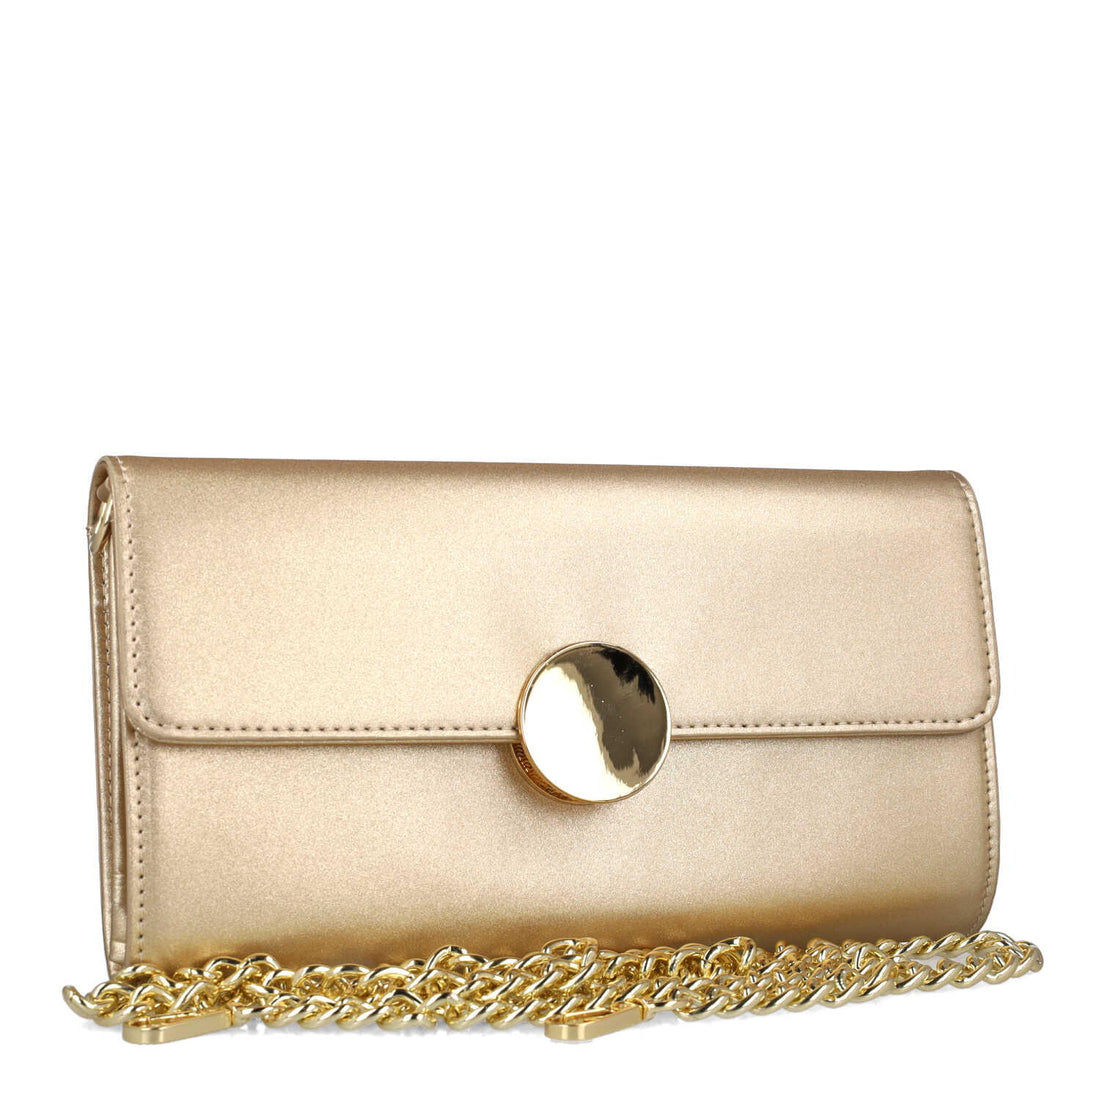 Gold Clutch Bag With Chain Strap_85712_00_02